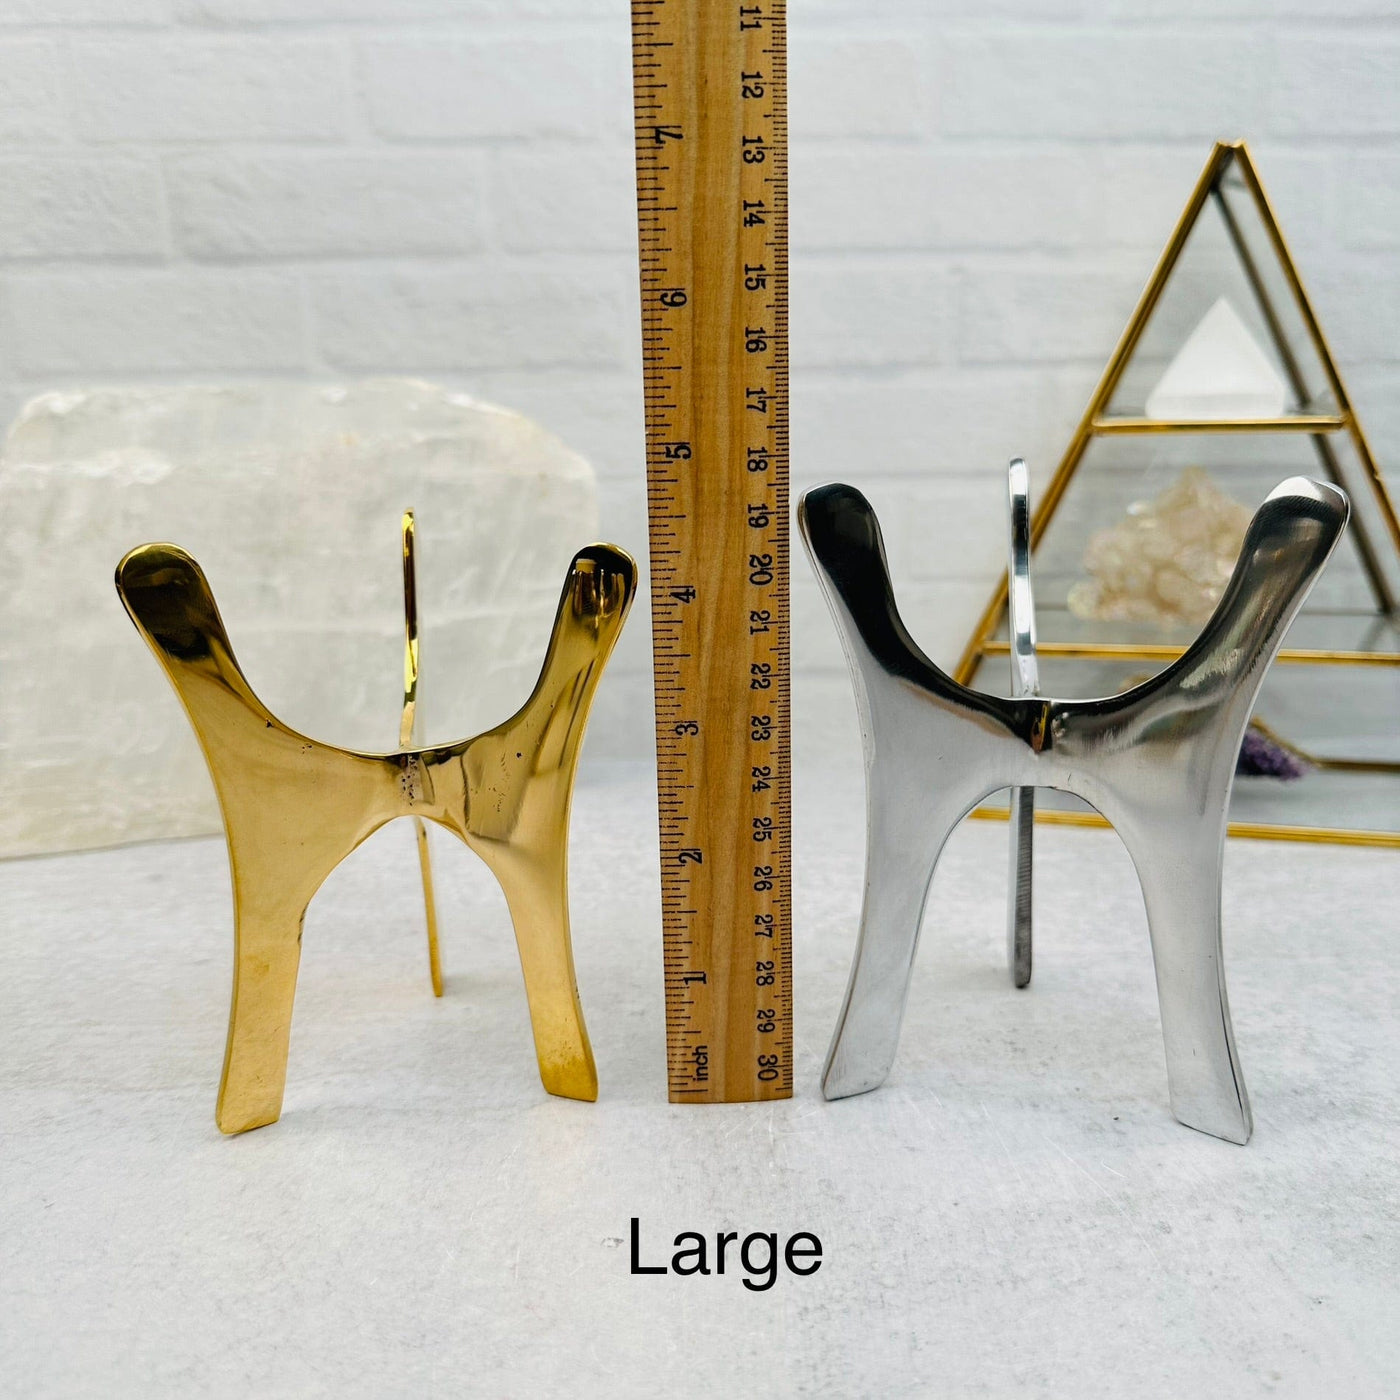 Crystal Tripod Stand next to a ruler for size reference 